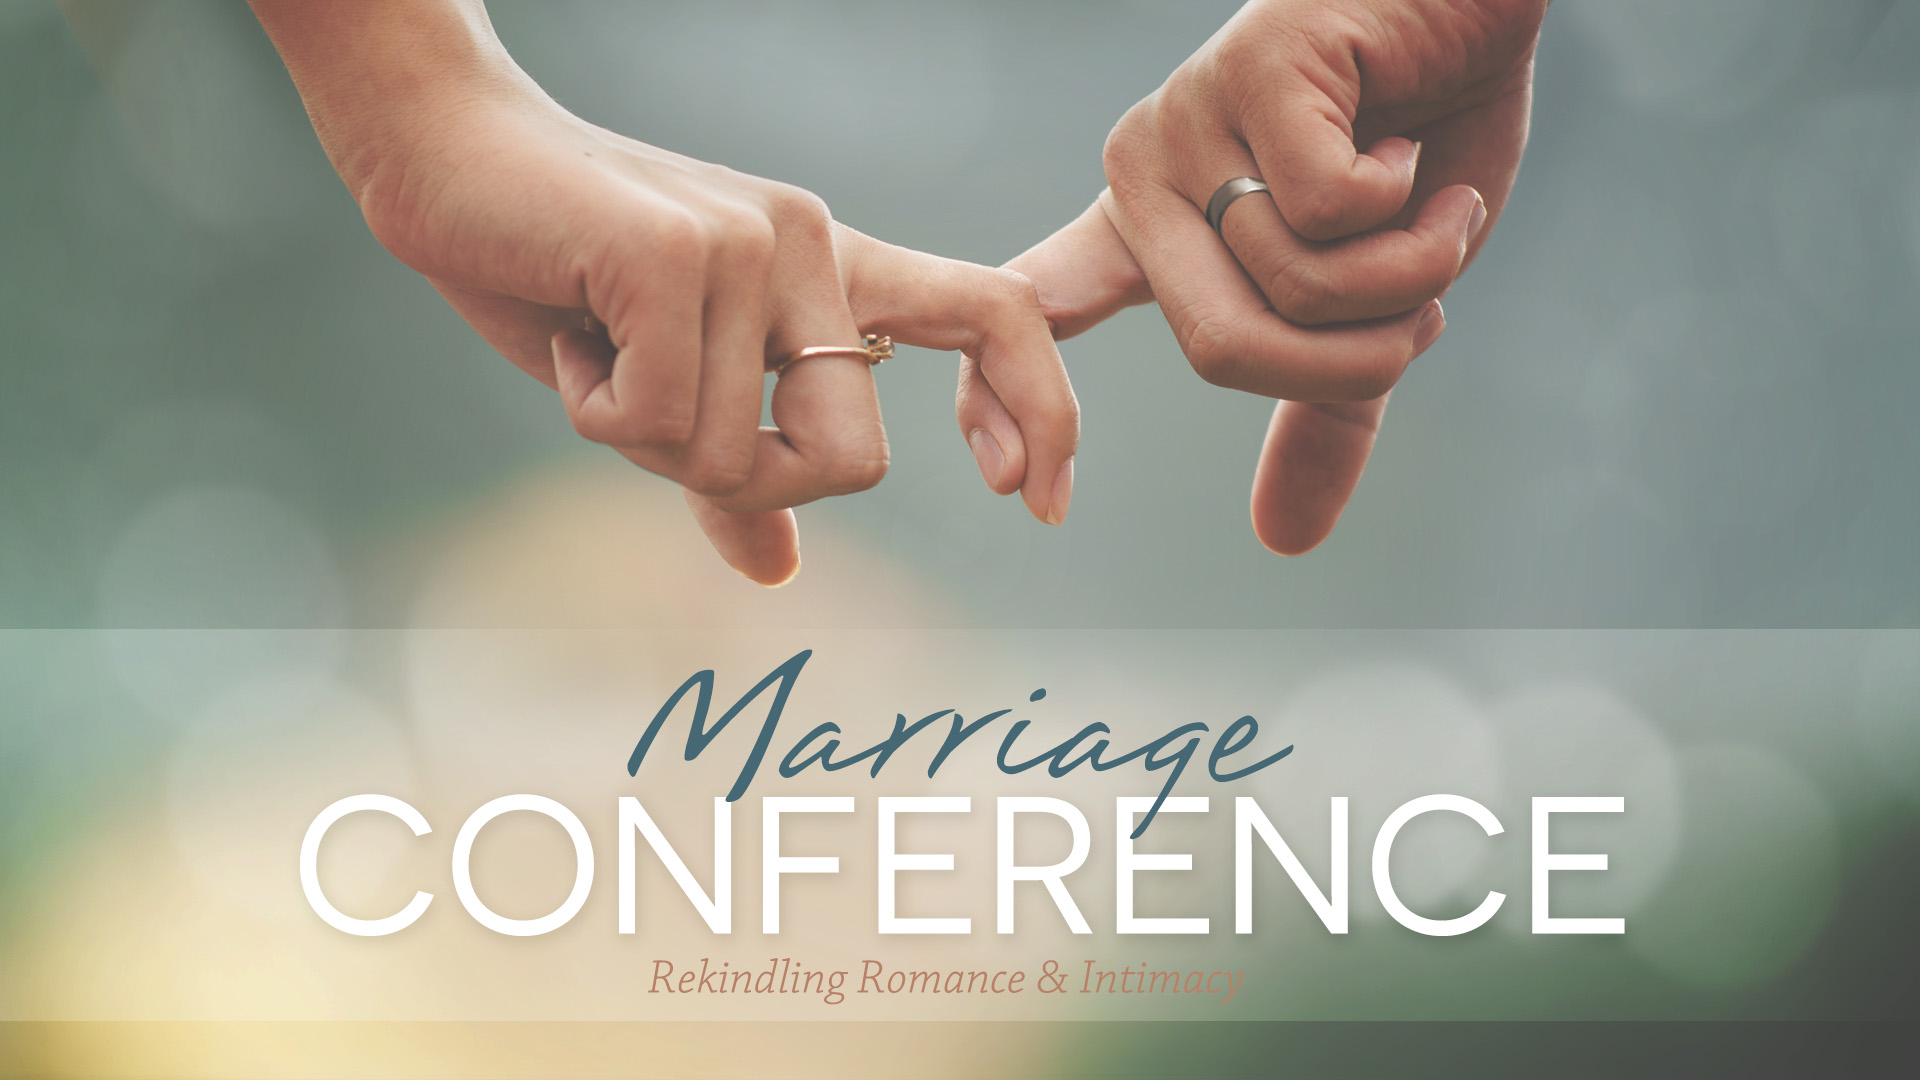 Marriage Conference February 2nd-3rd!